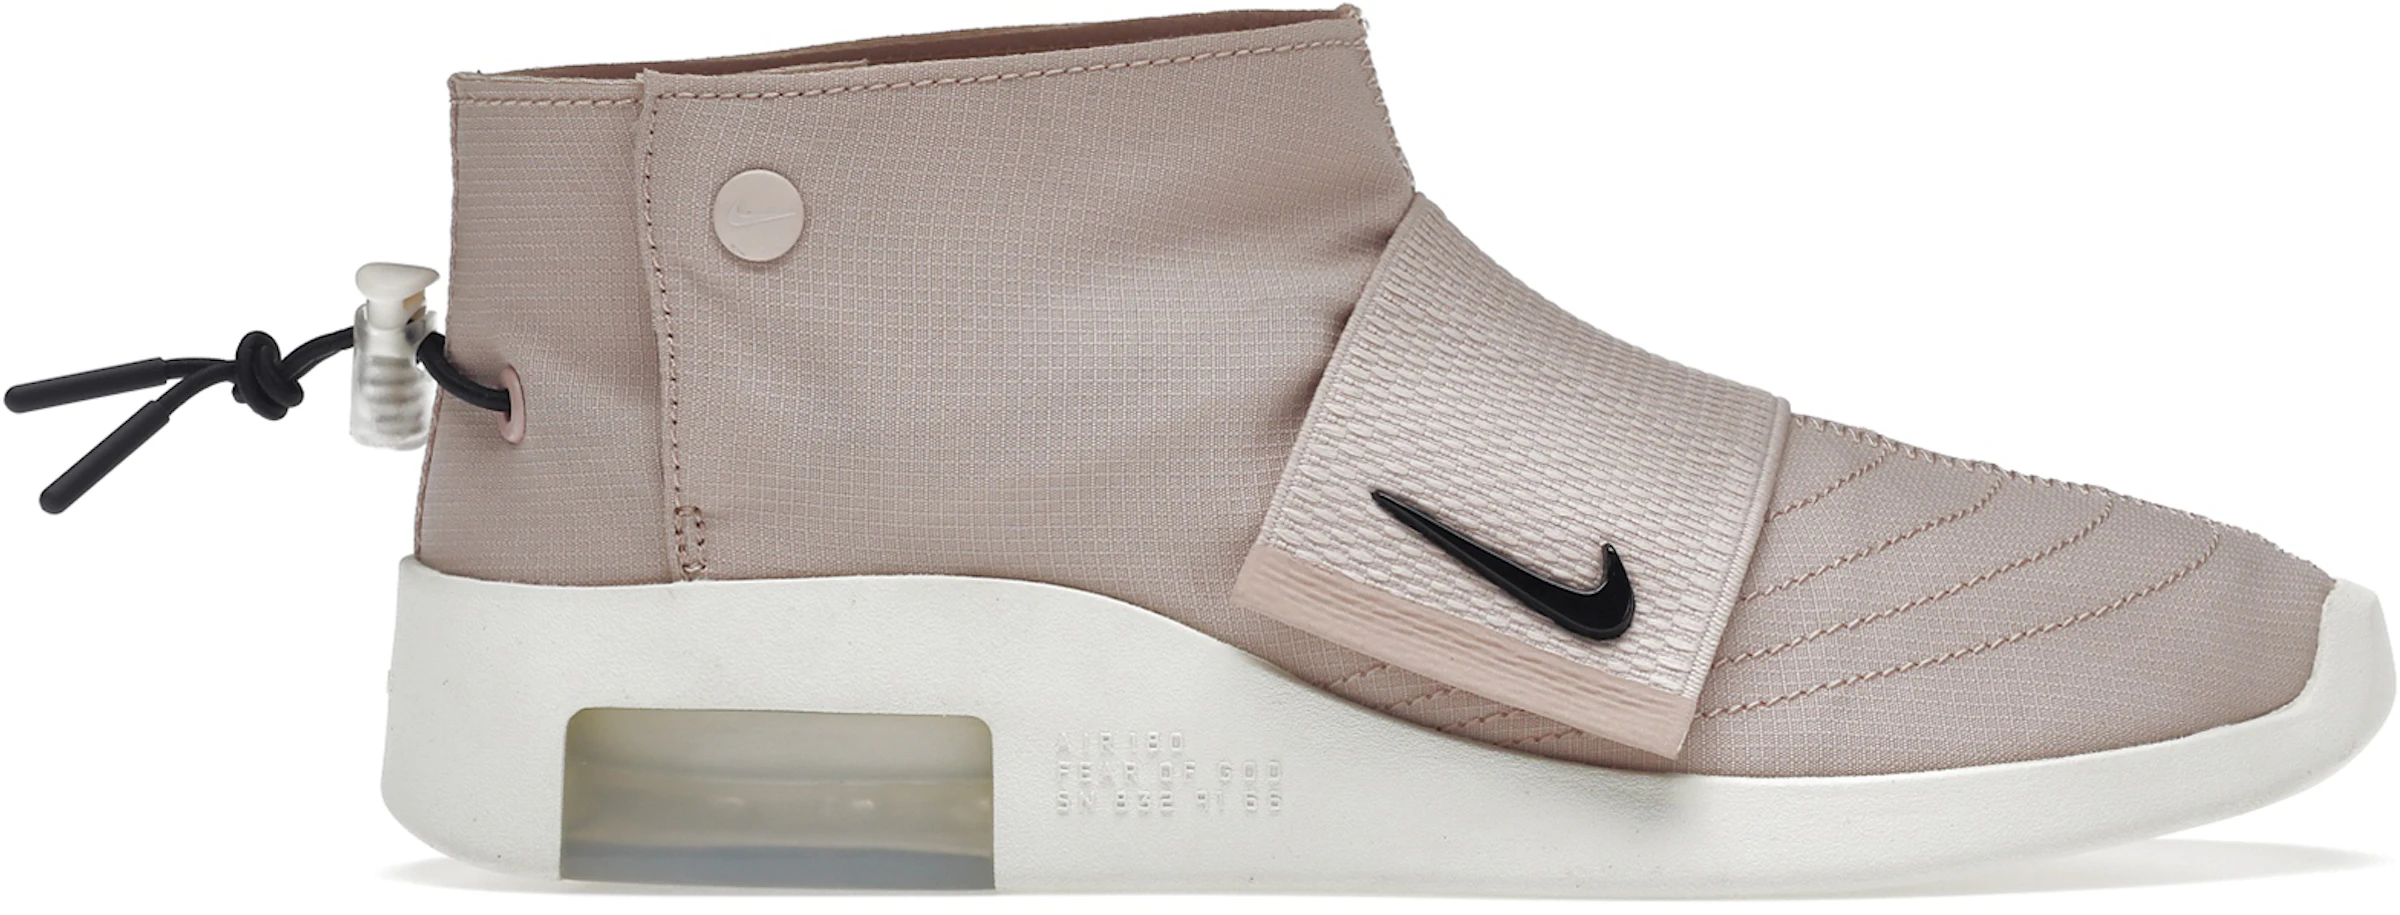 Nike Air Of God Moccasin Particle Beige - AT8086-200 - ES